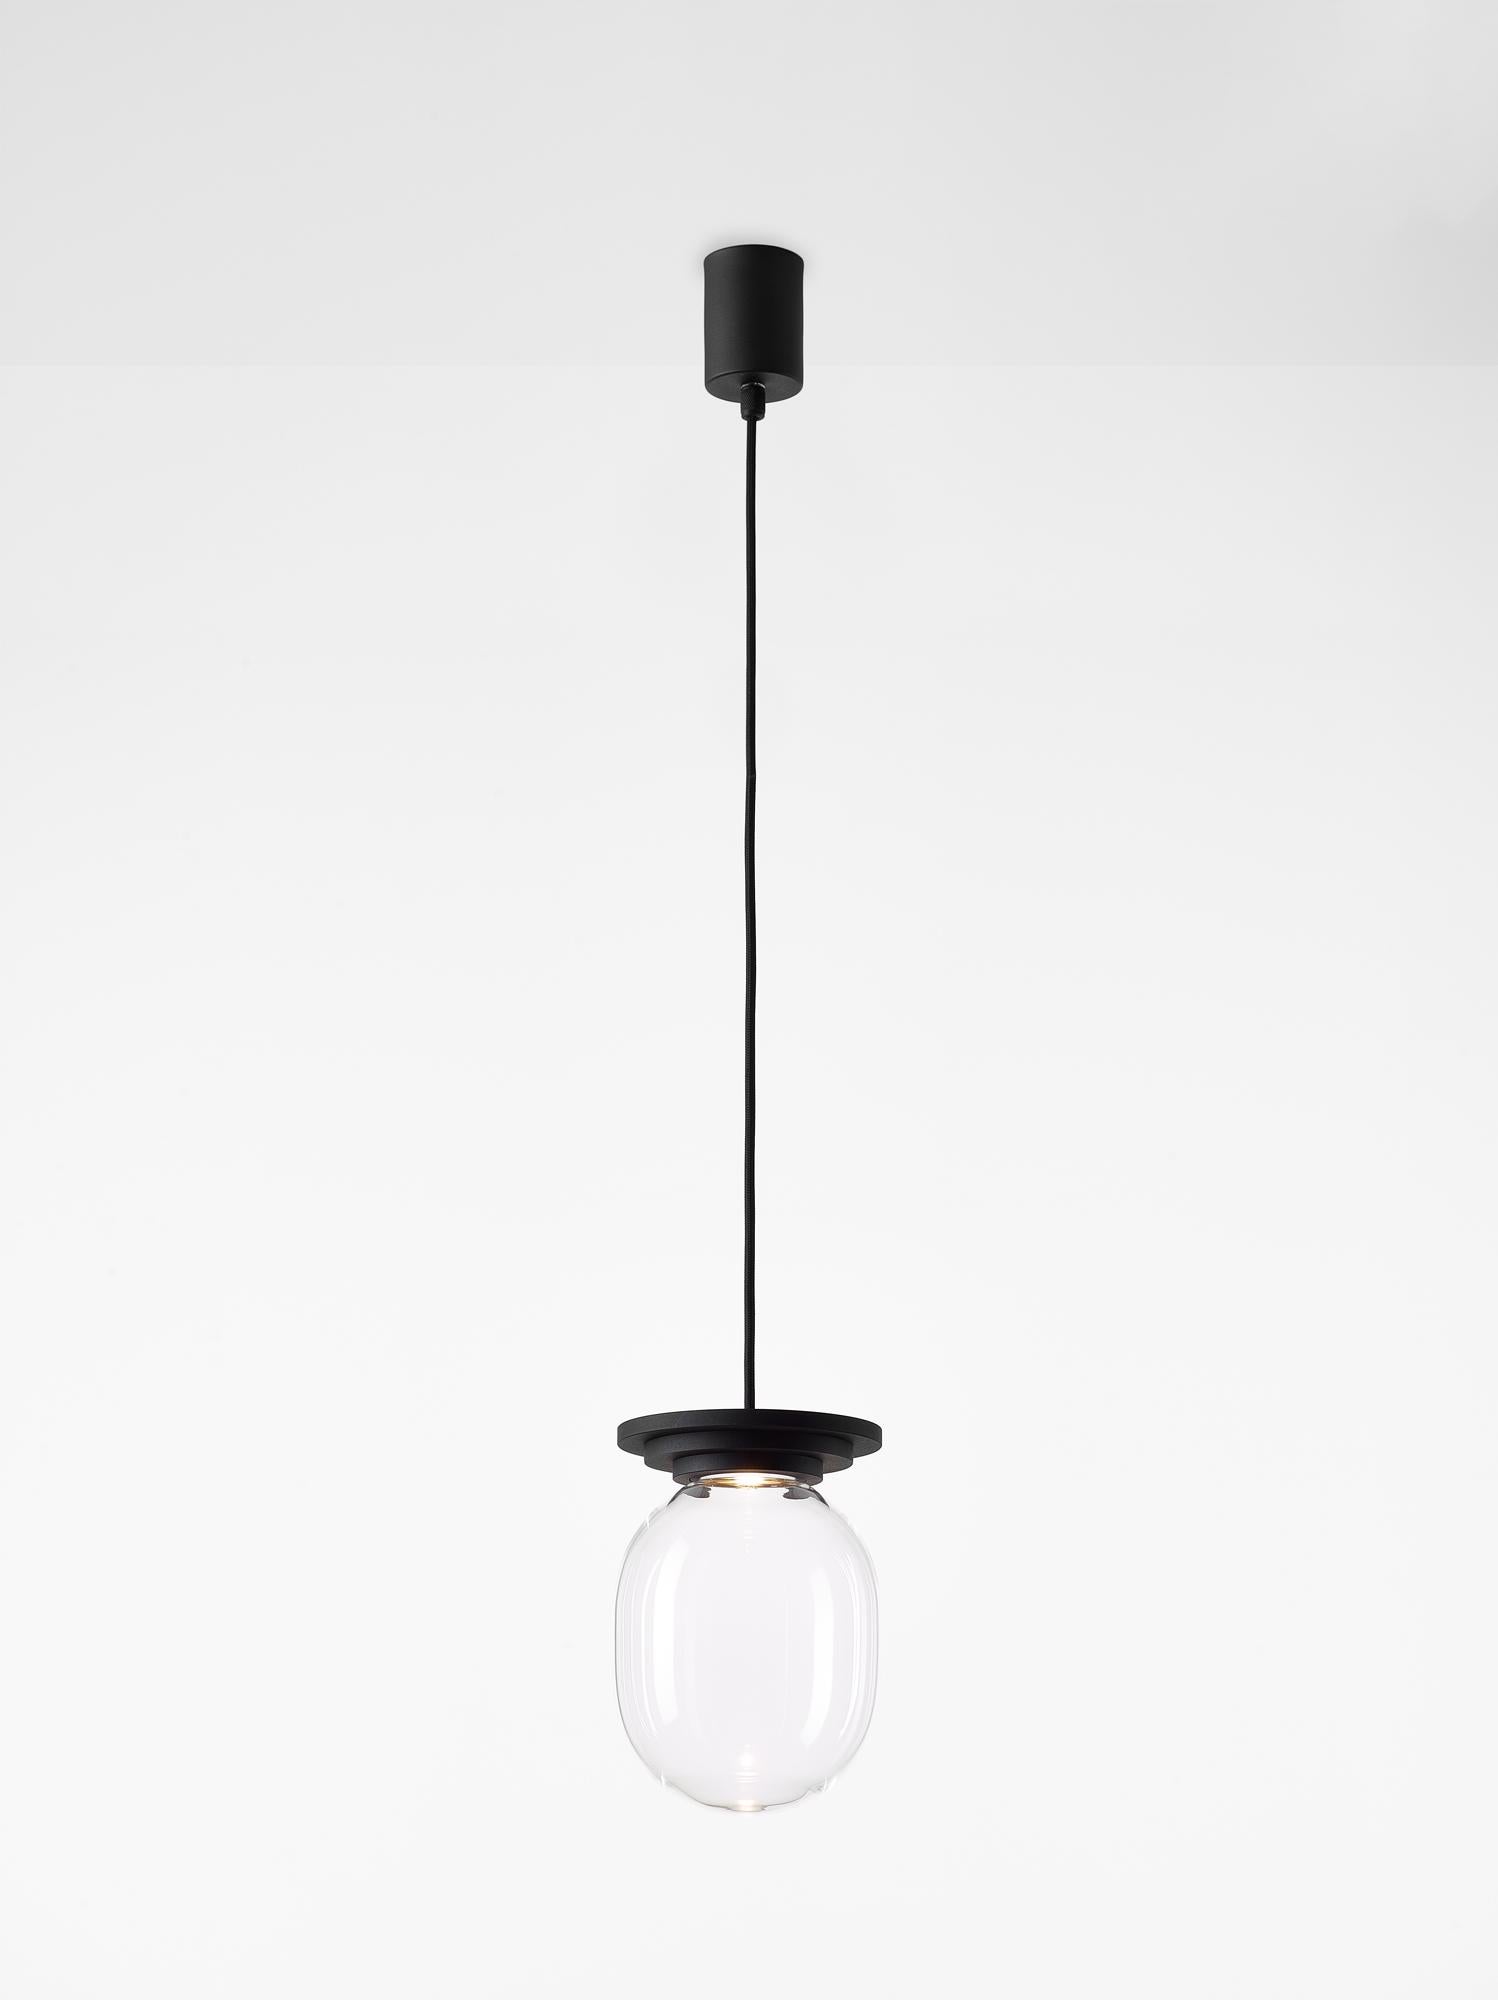 Set of 2 black and clear stratos big capsule pendant light by Dechem Studio
Dimensions: D 20 x H 28 cm
Materials: Aluminium glass.
Also available: Different colours available,
Different shapes of capsules and spheres contrast with anodized alloy